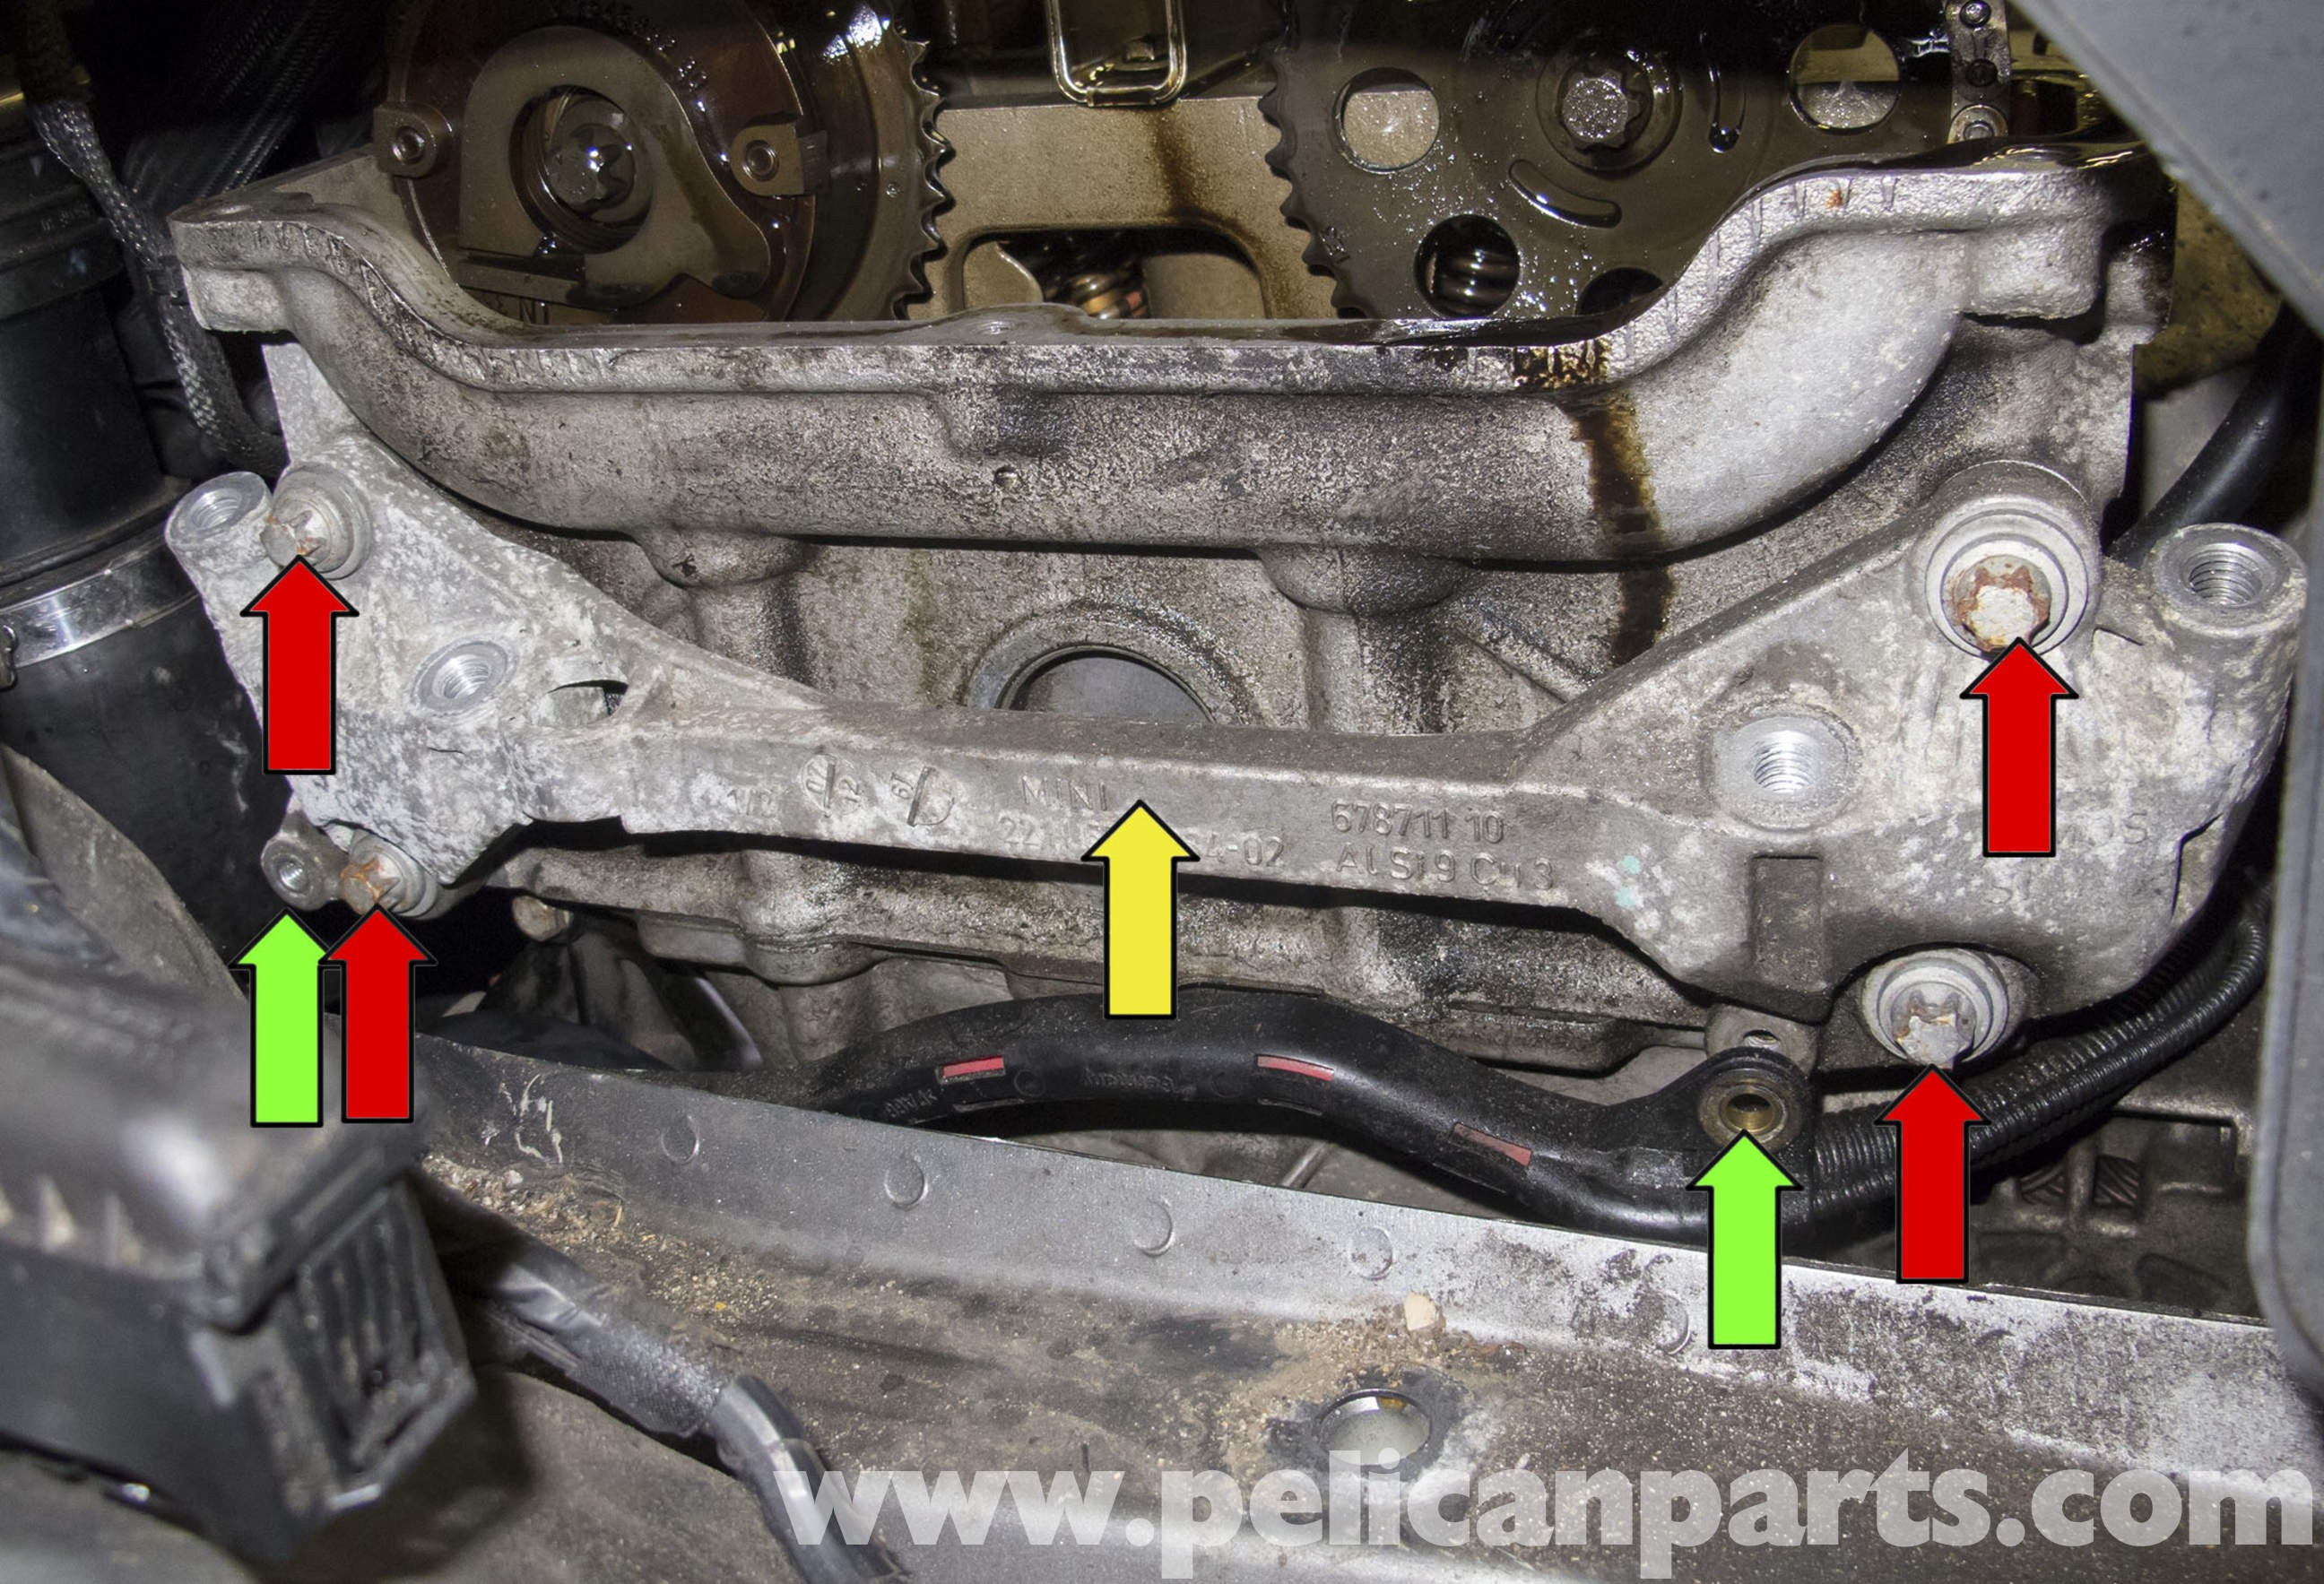 Mini One Engine Diagram Mini Cooper R56 Turbocharged Engine Timing Chain Guides Replacement Of Mini One Engine Diagram